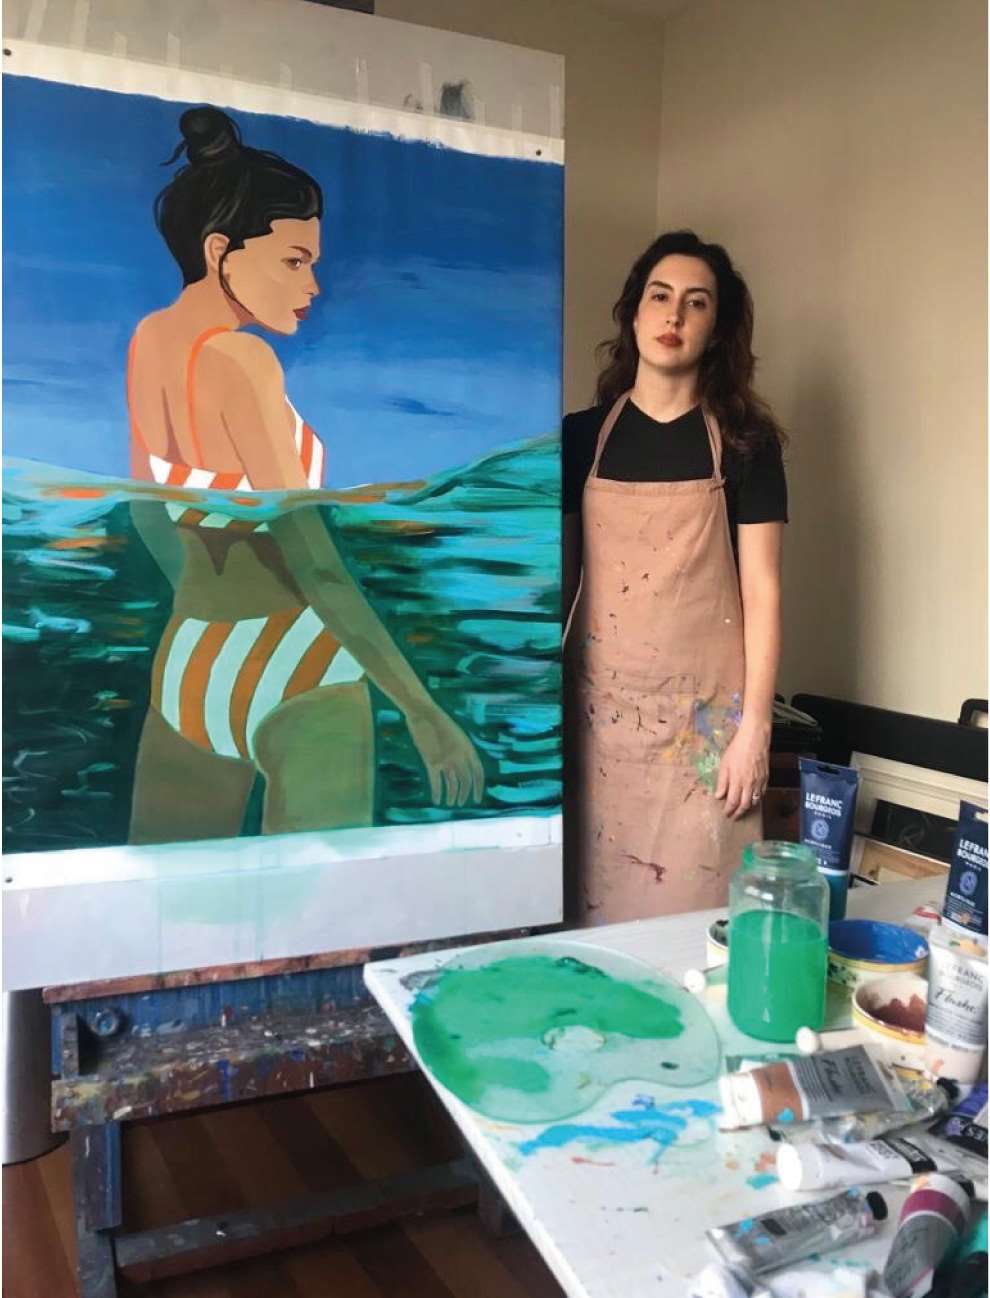 Camila Pinheiro, Camila photographed in her studio with a painting 